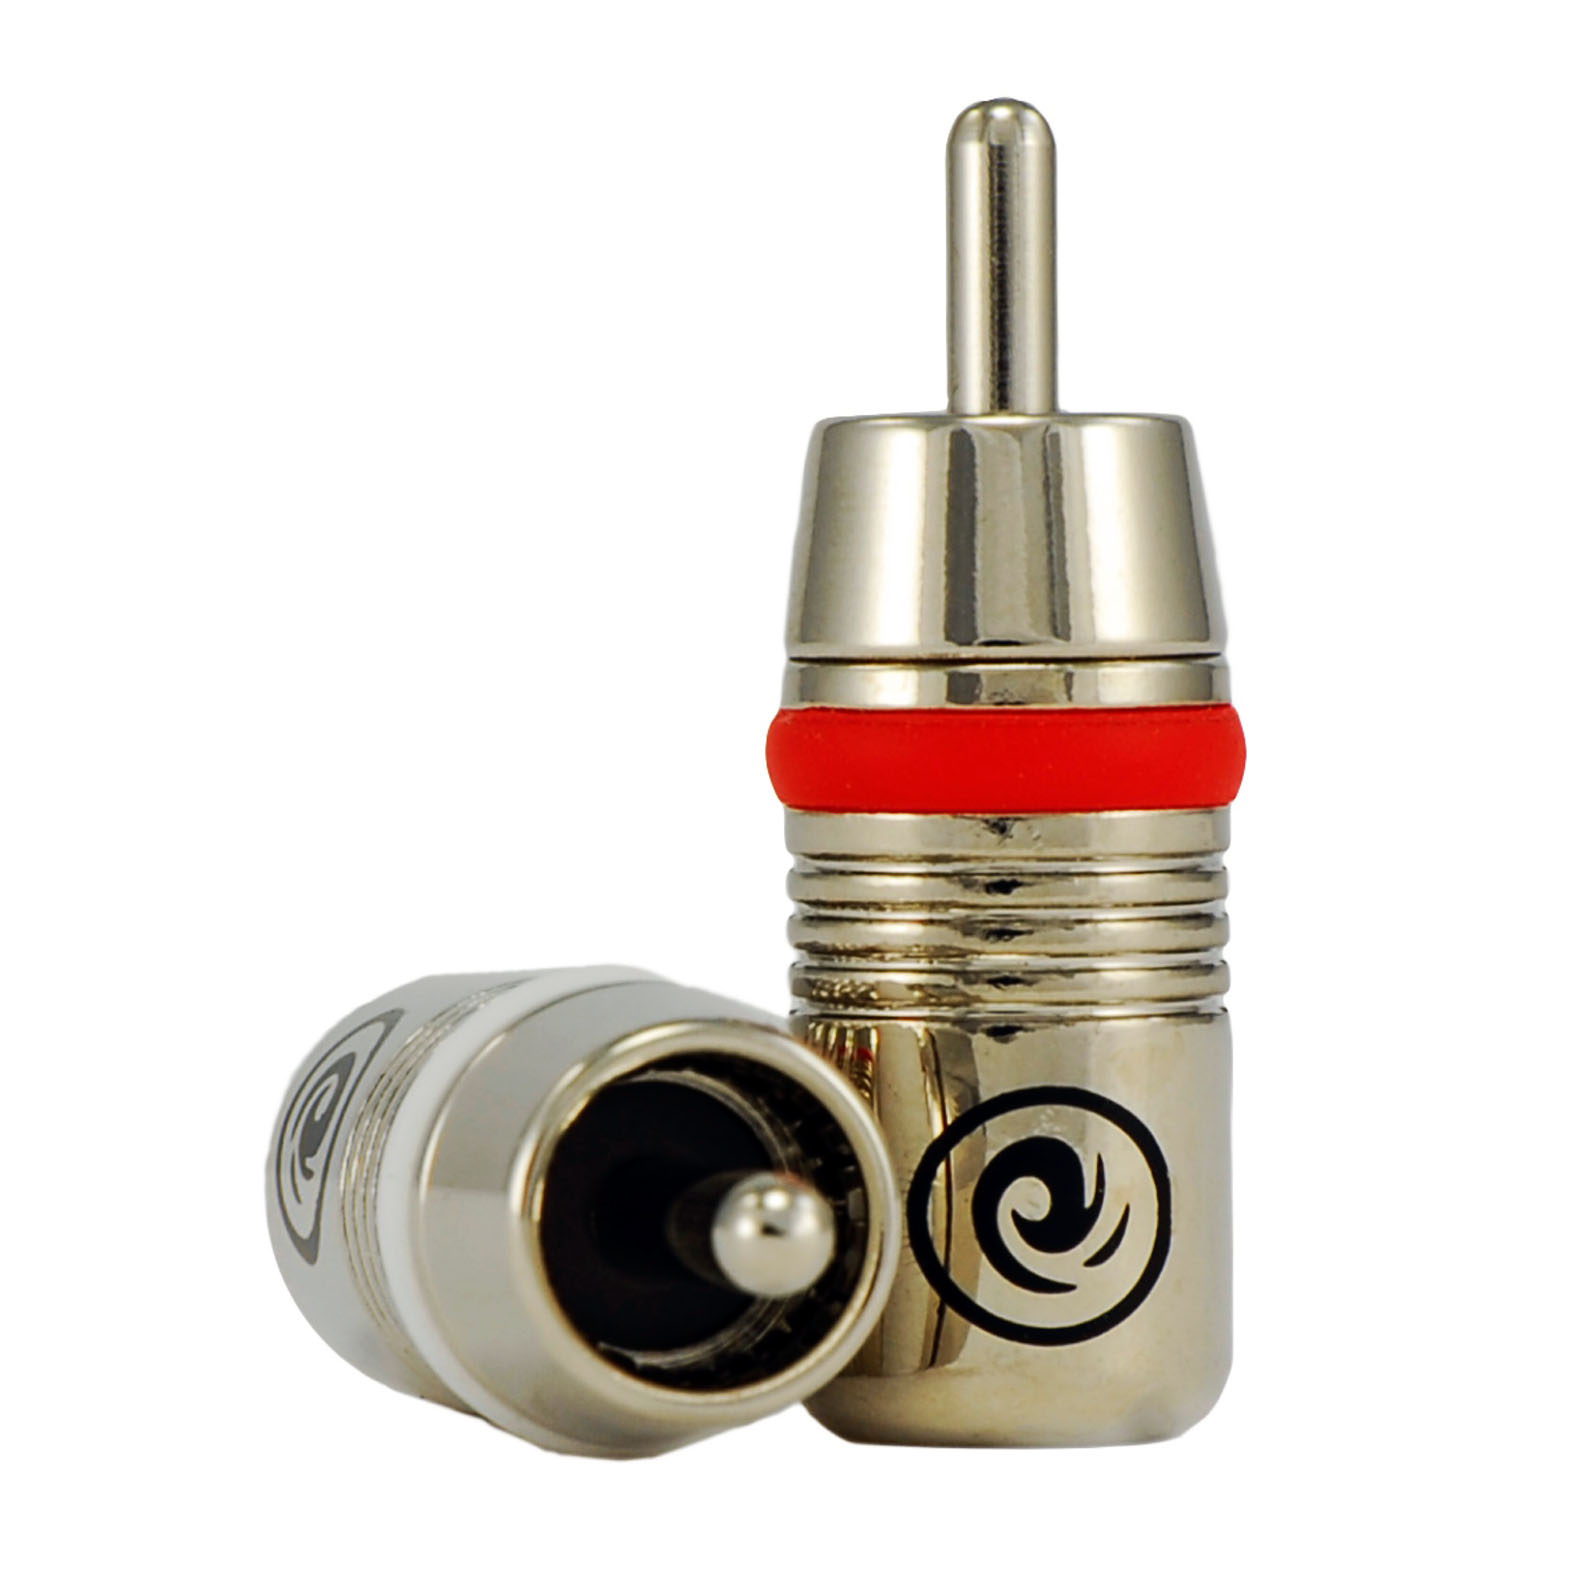 Planet Waves RCA Connectors (Nickel-Plated) [pack 50]